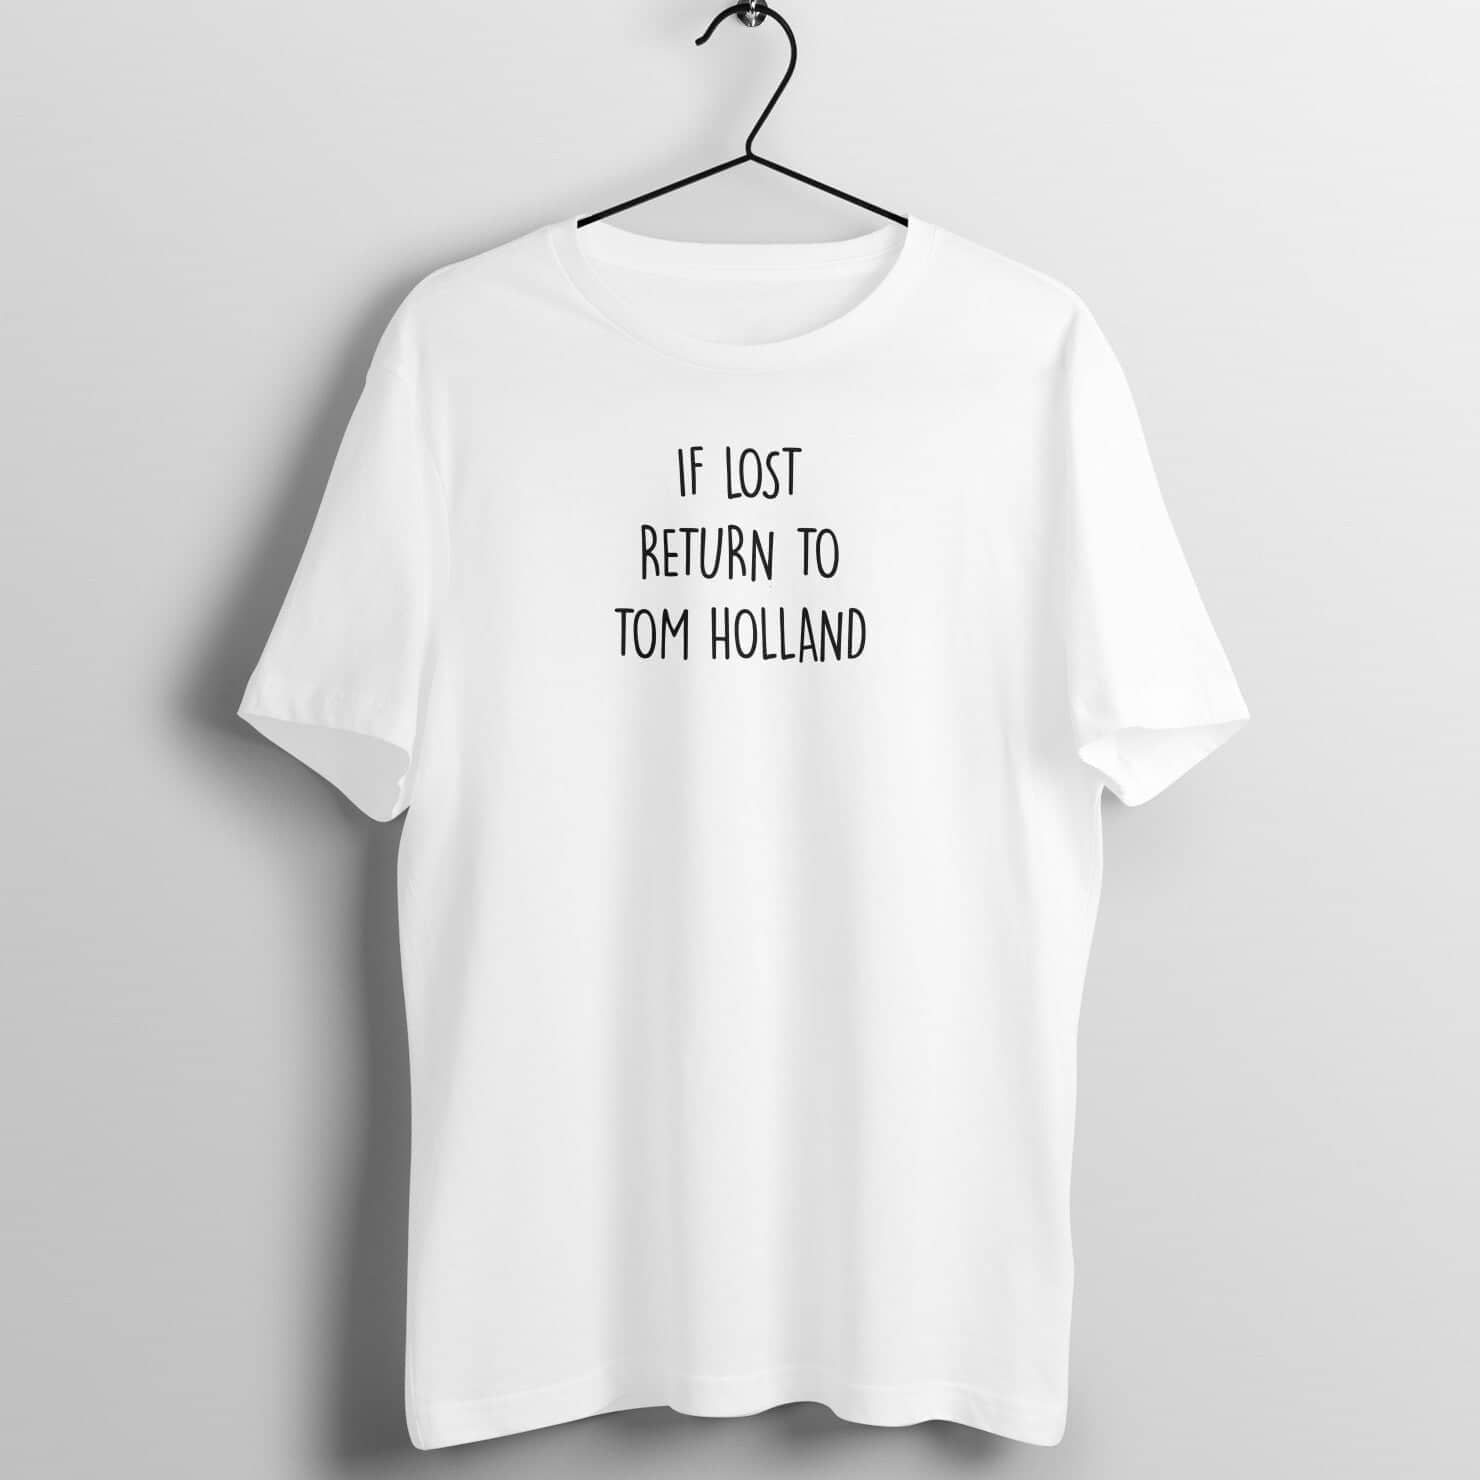 If Lost Return to Tom Holland Funny White T Shirt for Women freeshipping - Catch My Drift India